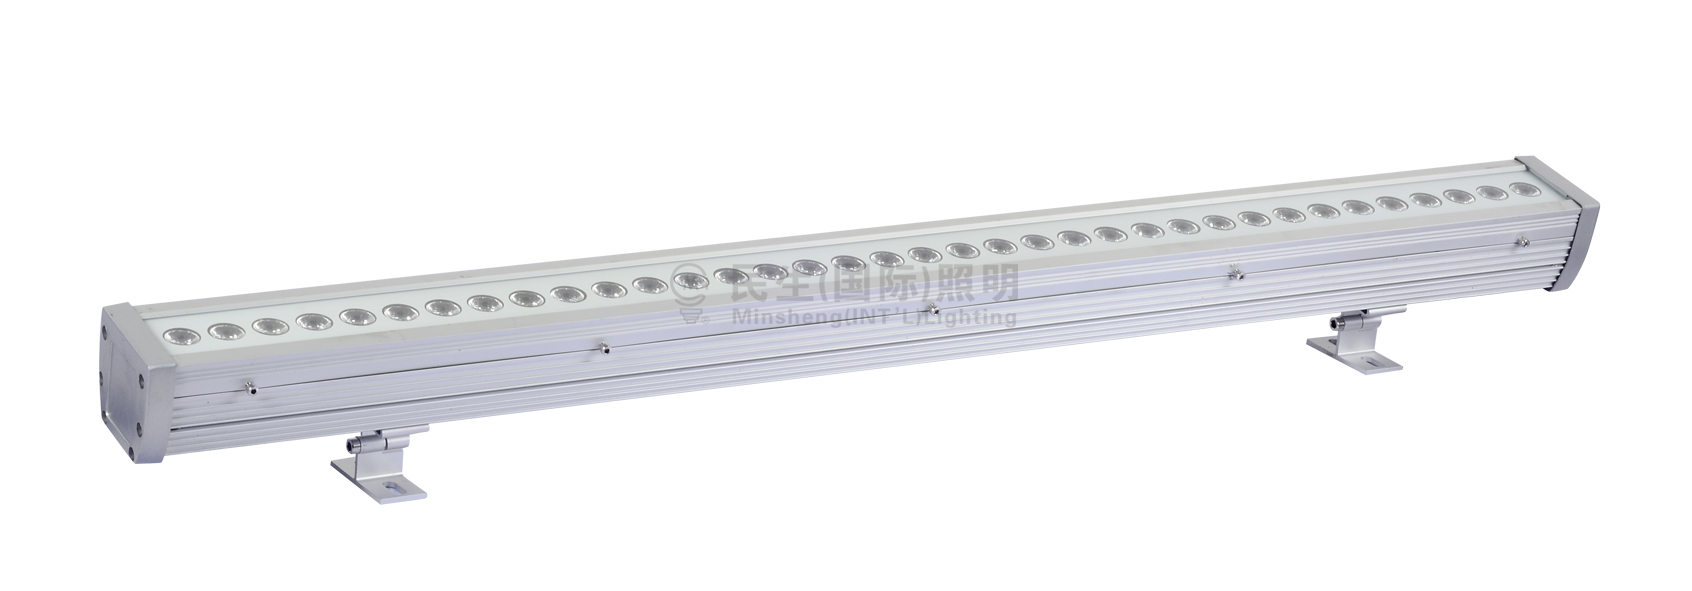 LED wall washer light series RGNW36-3W